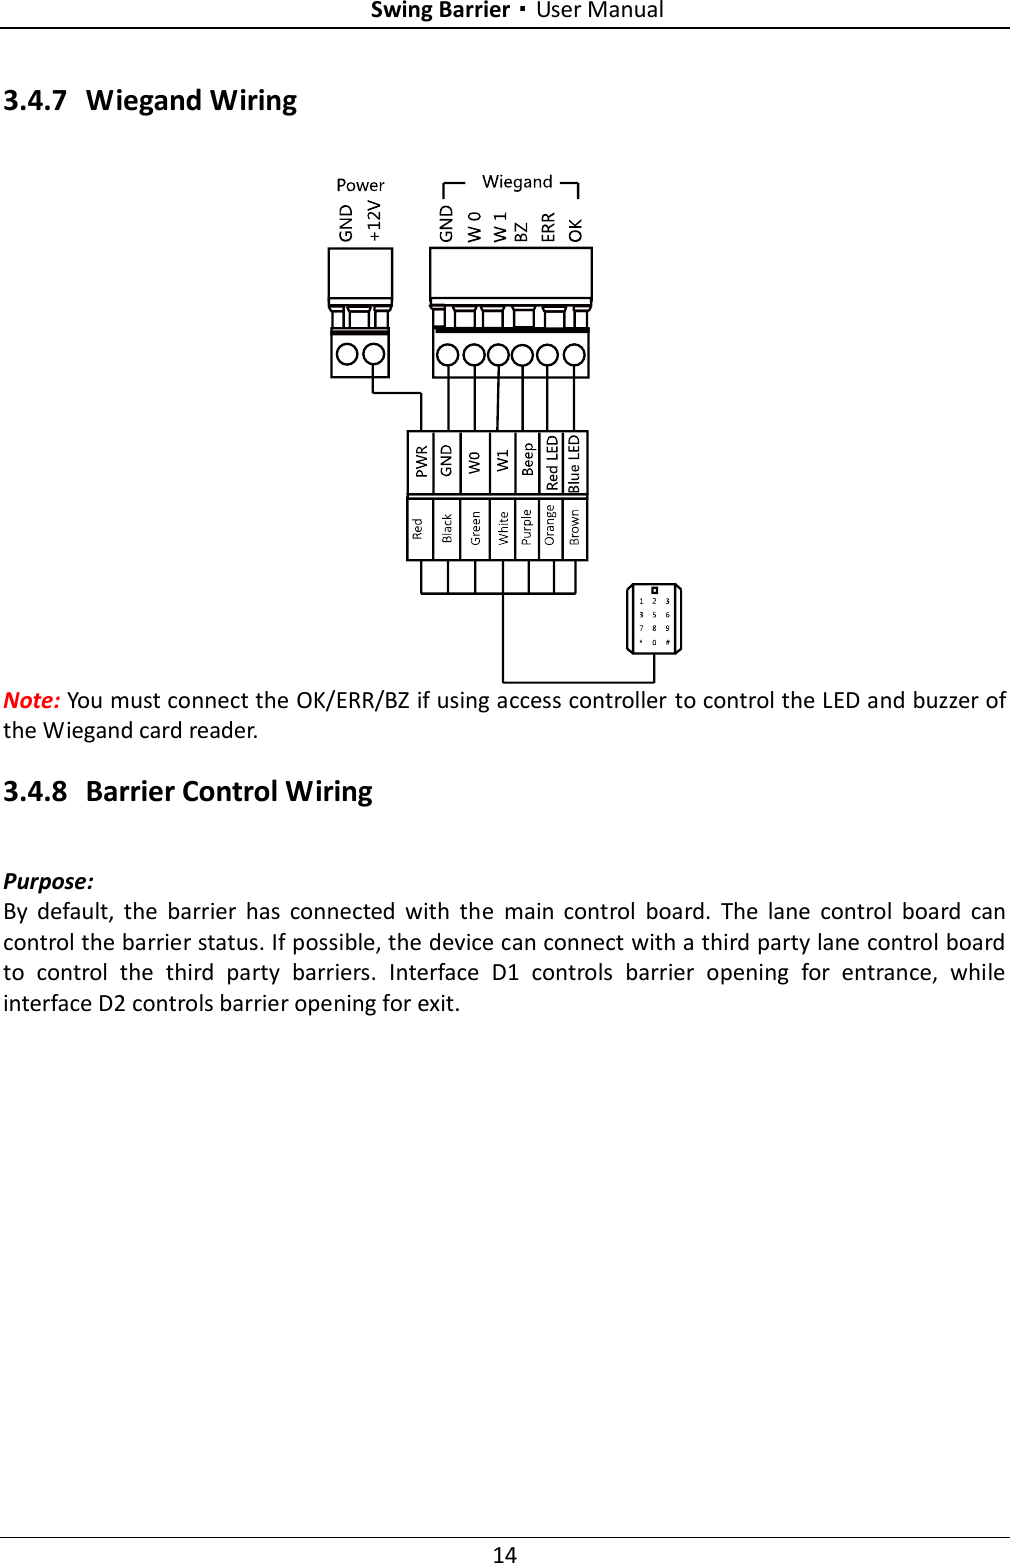 Swing Barrier·User Manual 14 3.4.7 Wiegand Wiring  Note: You must connect the OK/ERR/BZ if using access controller to control the LED and buzzer of the Wiegand card reader. 3.4.8 Barrier Control Wiring Purpose: By  default,  the  barrier  has  connected  with  the  main  control  board.  The  lane  control  board  can control the barrier status. If possible, the device can connect with a third party lane control board to  control  the  third  party  barriers.  Interface  D1  controls  barrier  opening  for  entrance,  while interface D2 controls barrier opening for exit. 